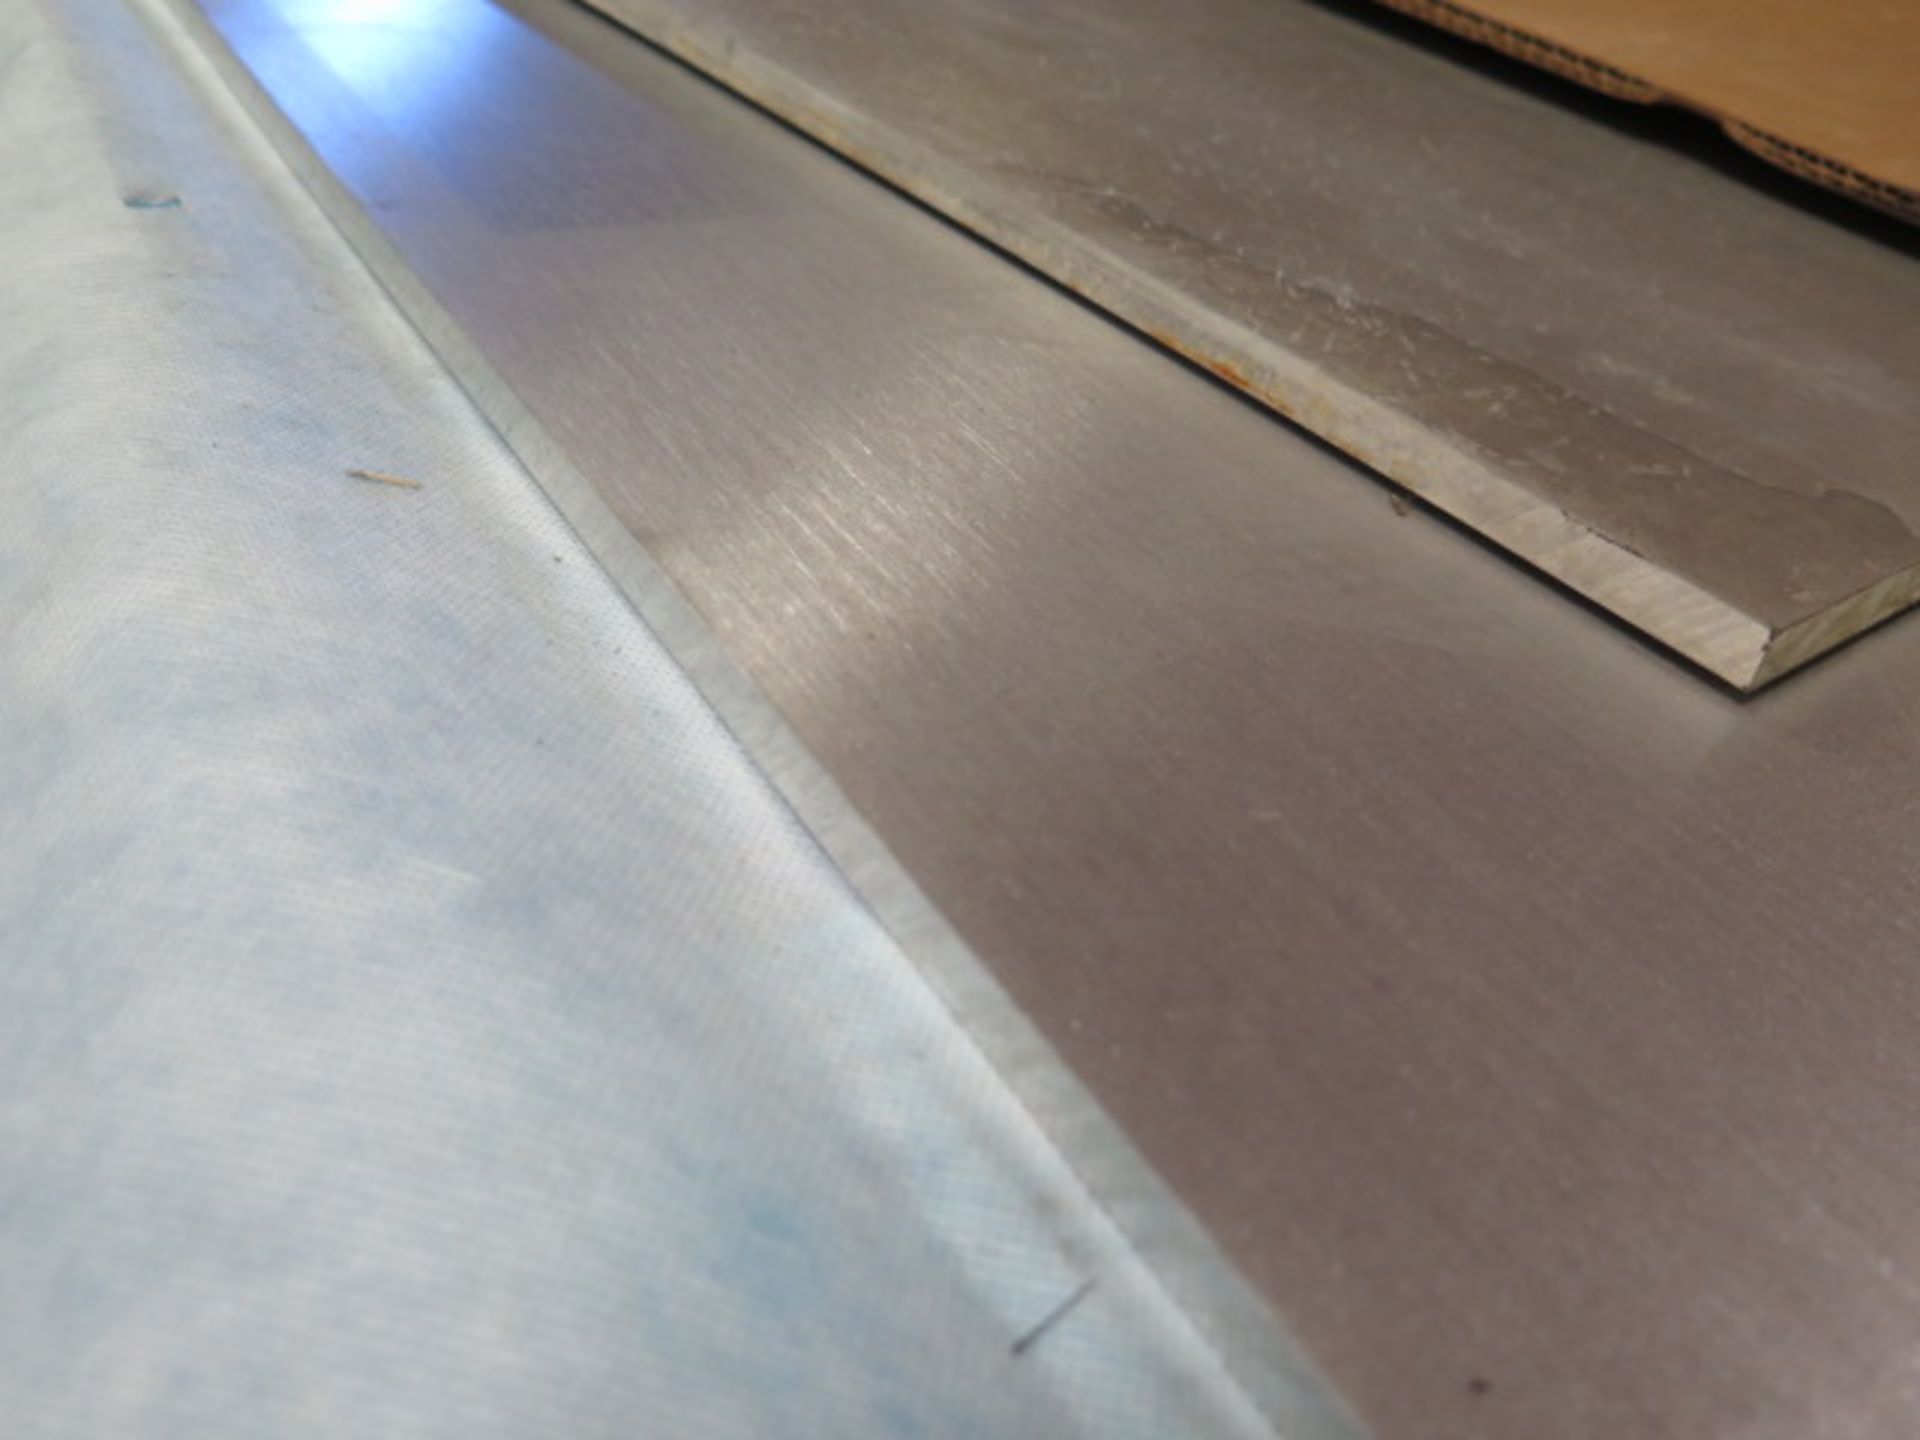 Raw Materials Aluminum and Steel Sheet Stock, Remnants and Fixtures - Image 3 of 6